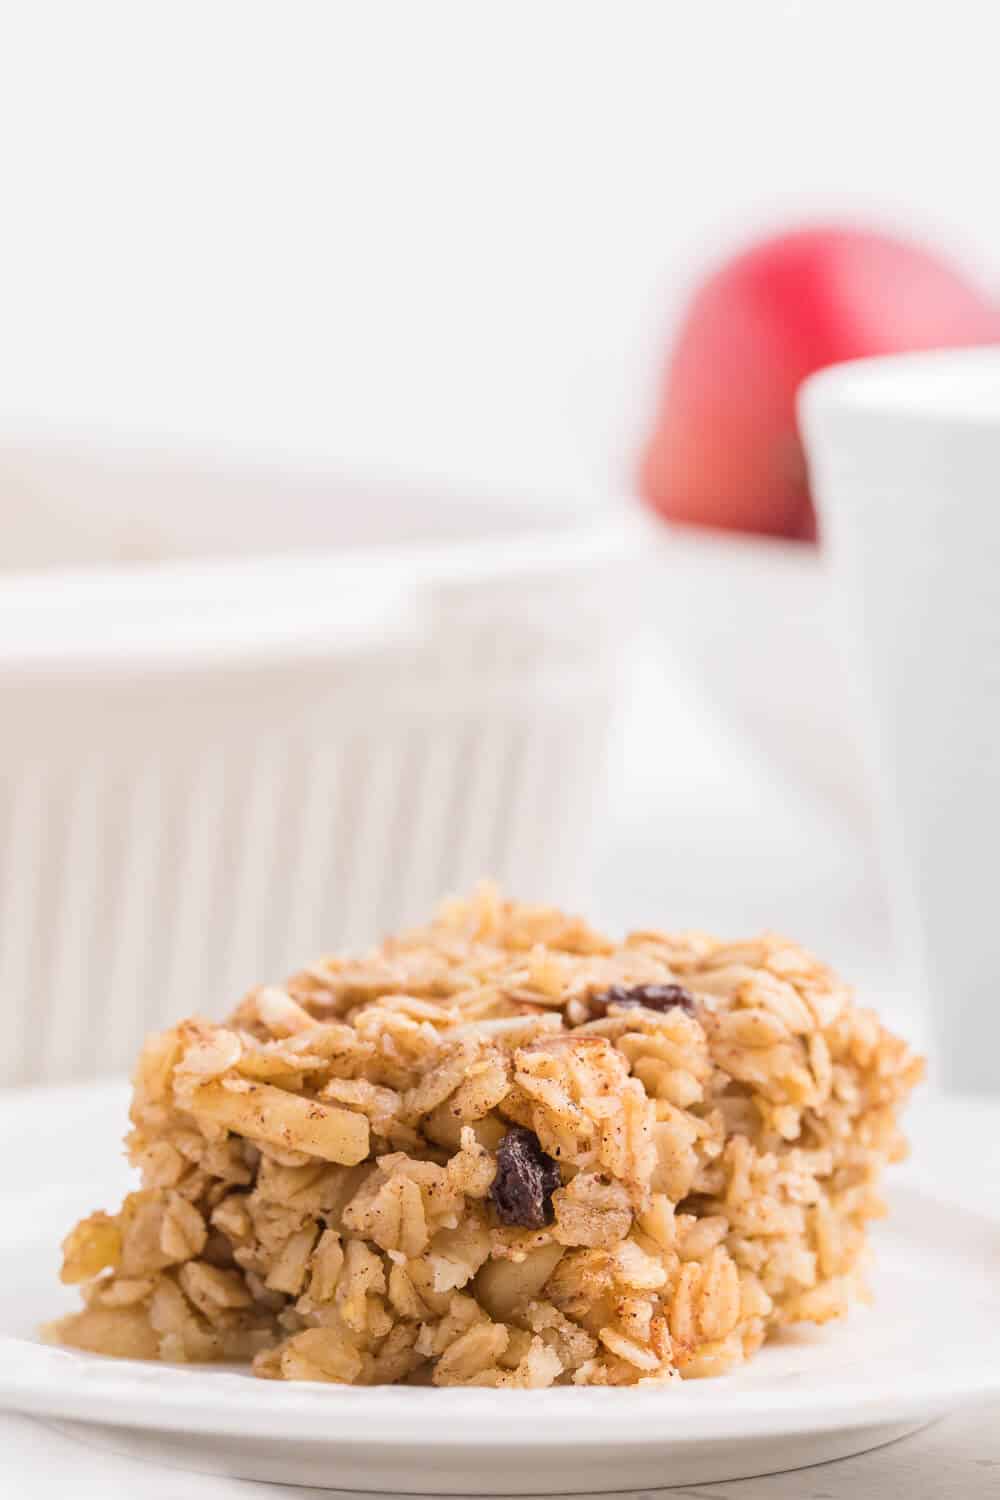 Oatmeal Casserole - This baked oatmeal is hearty, warm and filling. Loaded with apples, raisins and almonds, or whatever your favourite additions are, the whole family is sure to enjoy it!